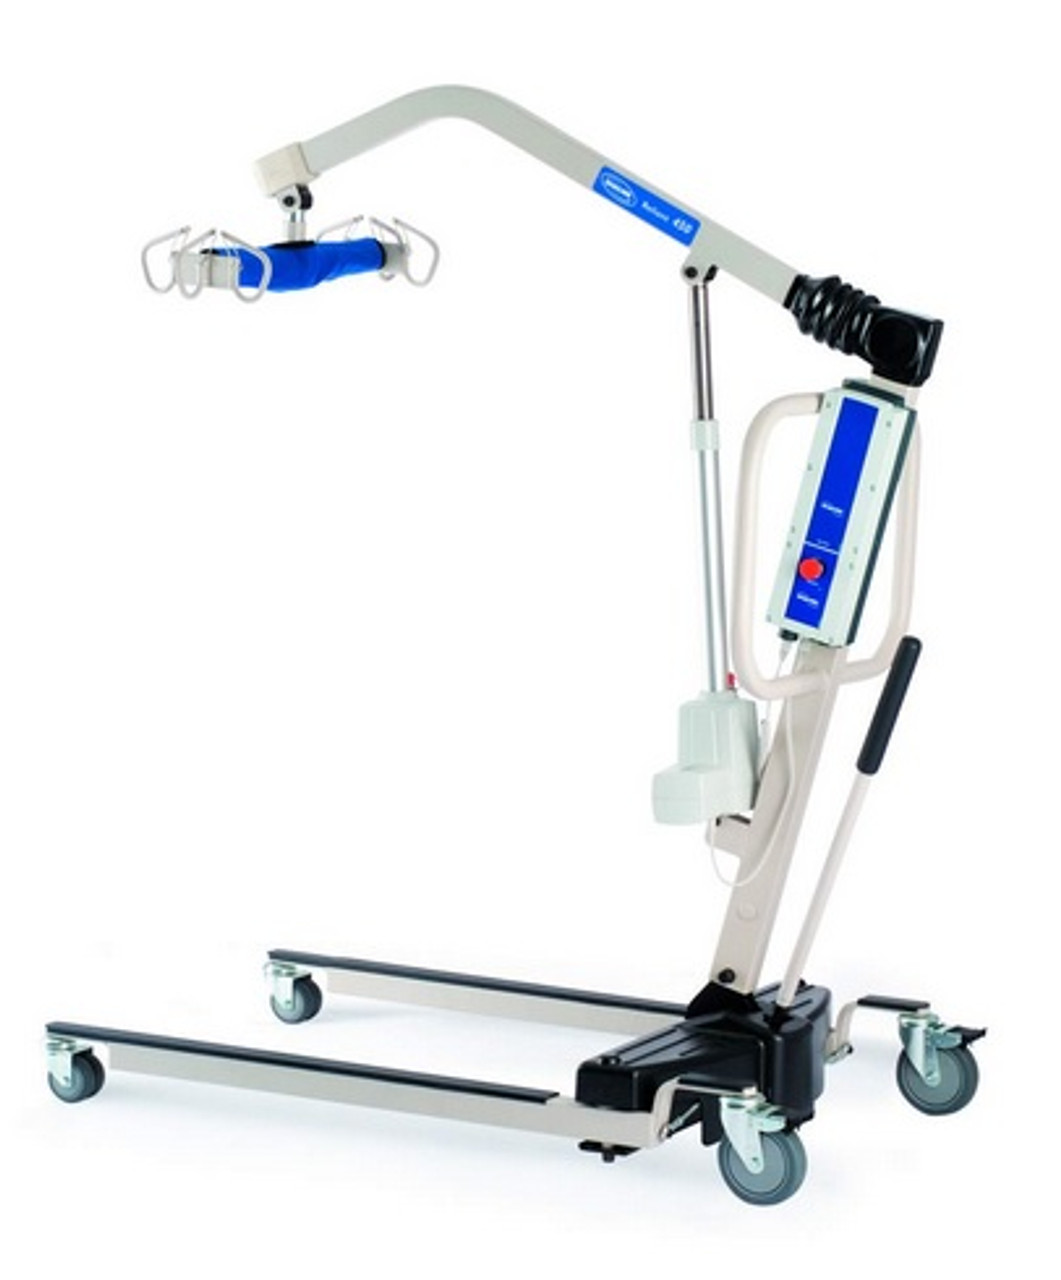 Reliant 450 Battery-Powered Lift, by Invacare